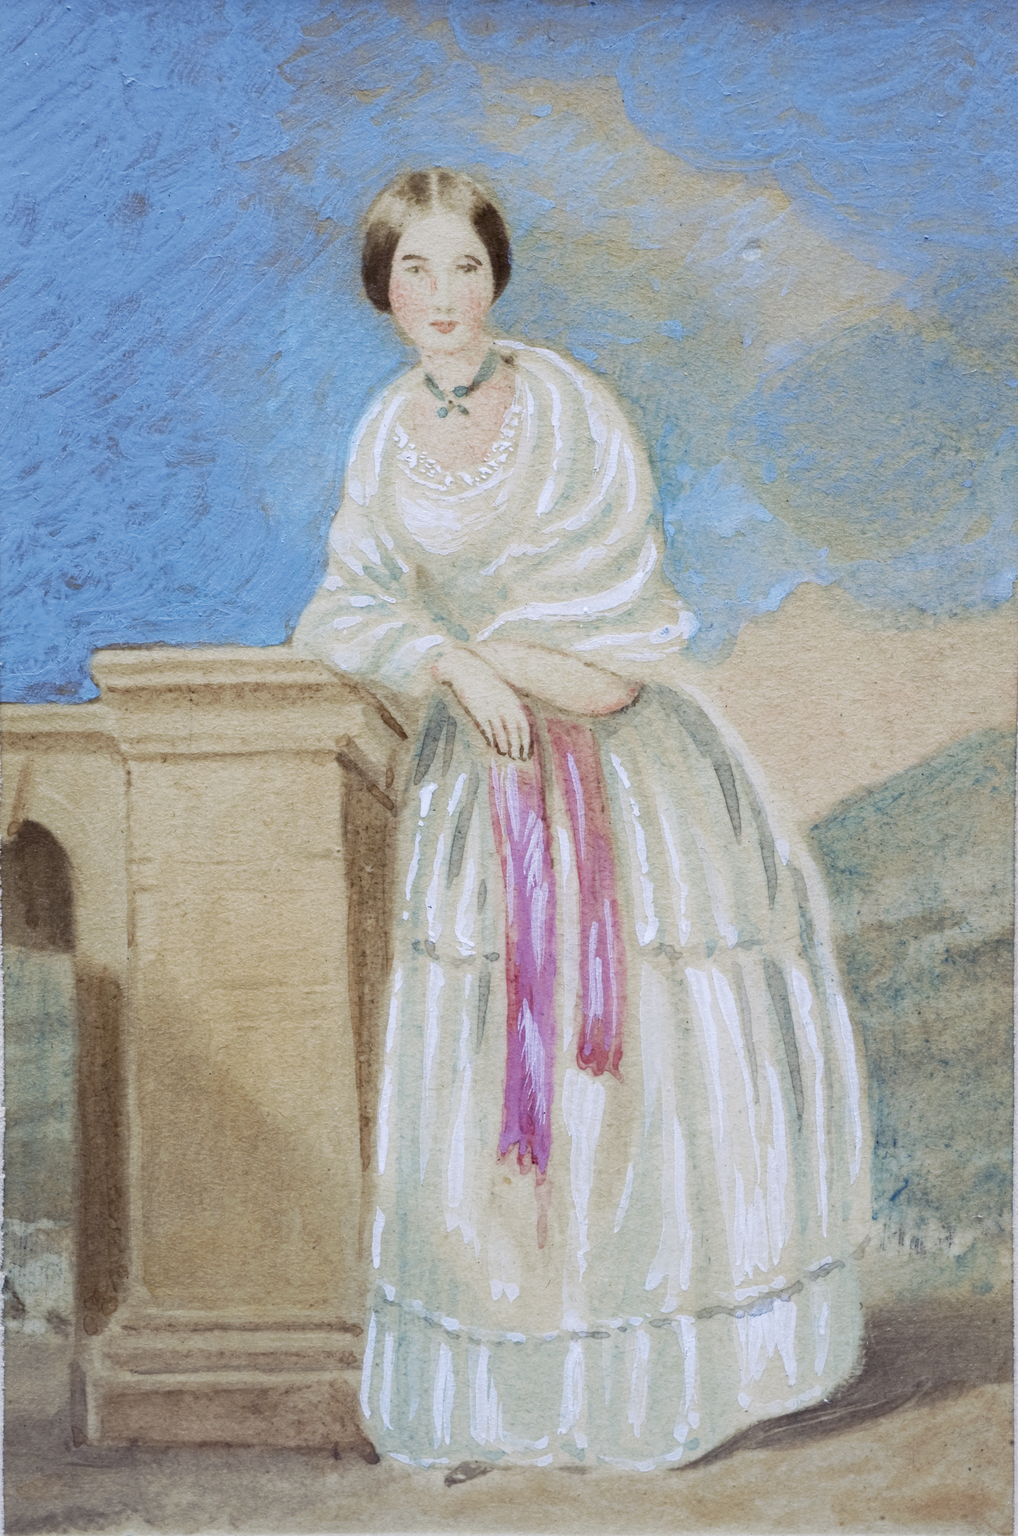 Watercolour portrait of Florence Nightingale, a white woman with pale skin and dark hair tied back. She is leaning on a stone pillar against a blue sky and green hills in the background. She wears a long white dress8 and shawl, with a bright pink sash around her waist and a silver necklace.